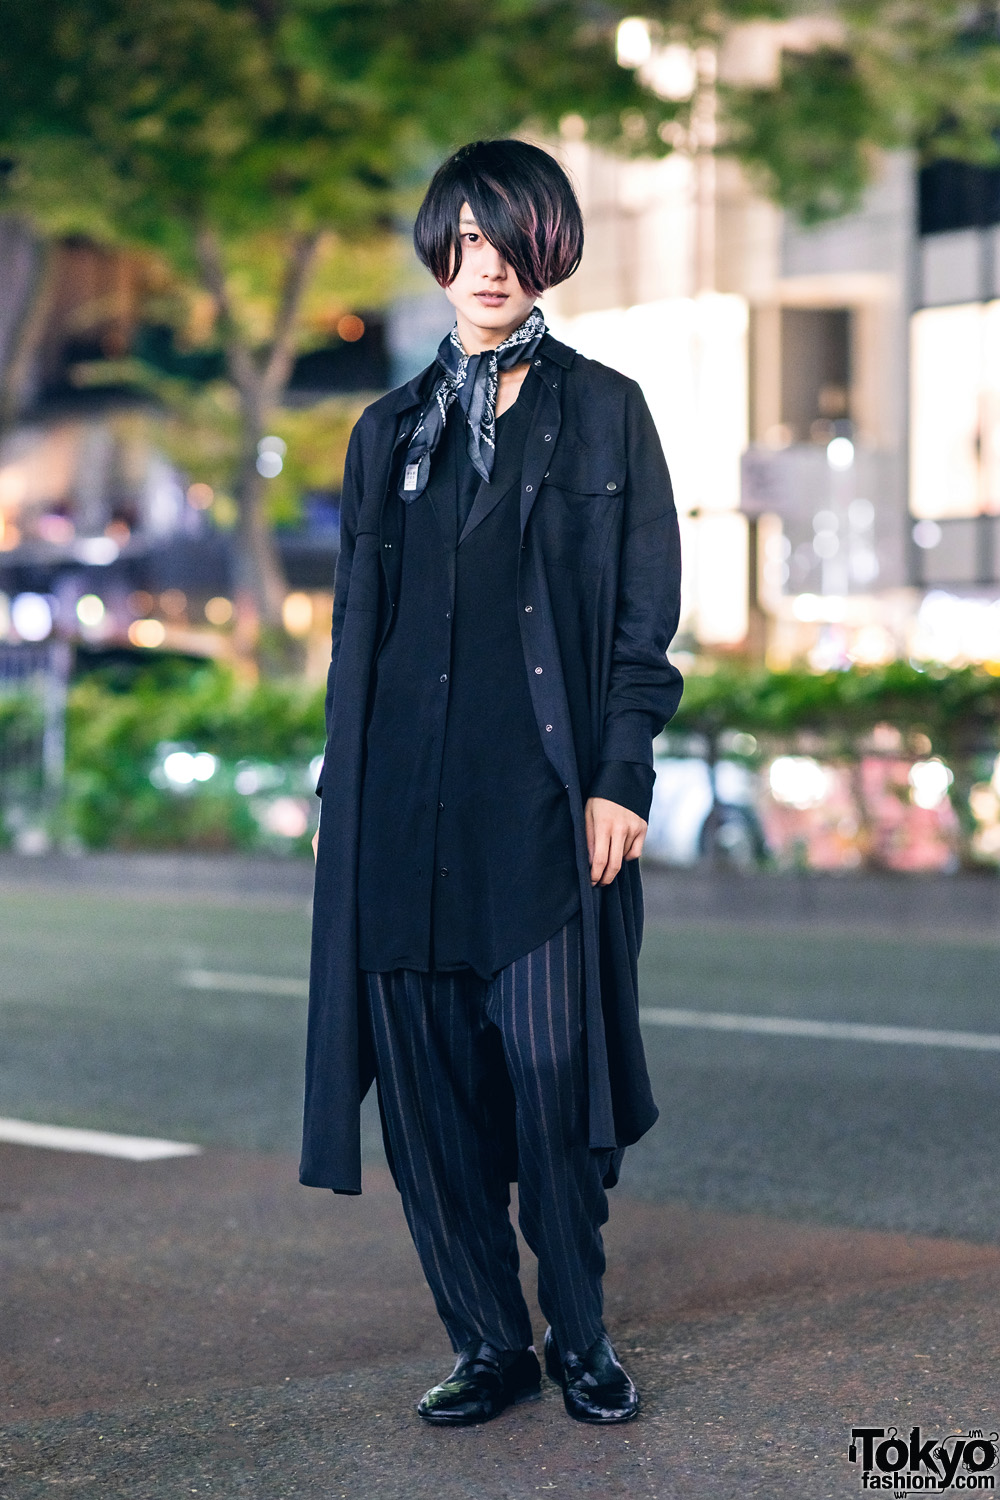 All Black Zara Menswear Look in Harajuku w/ Neck Scarf, Layered Tops, Pinstripe Pants, The Ginza Toe & Leather Loafers